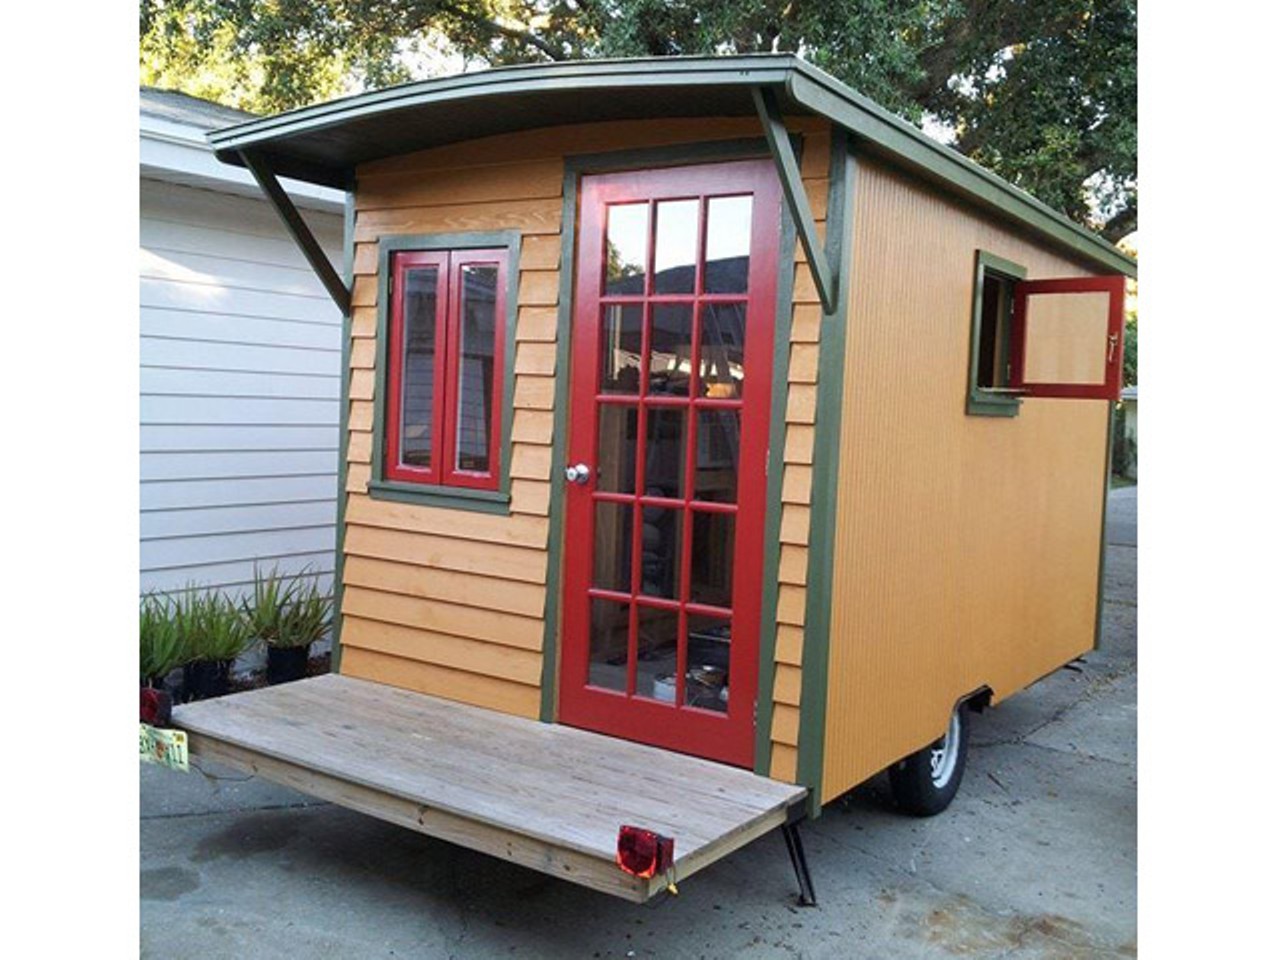 Gypsy Wagon Camper
Location: Clearwater
Price: $9250
Size: 90 sq ft 
Yep, you can actually live in this 8x12 home.